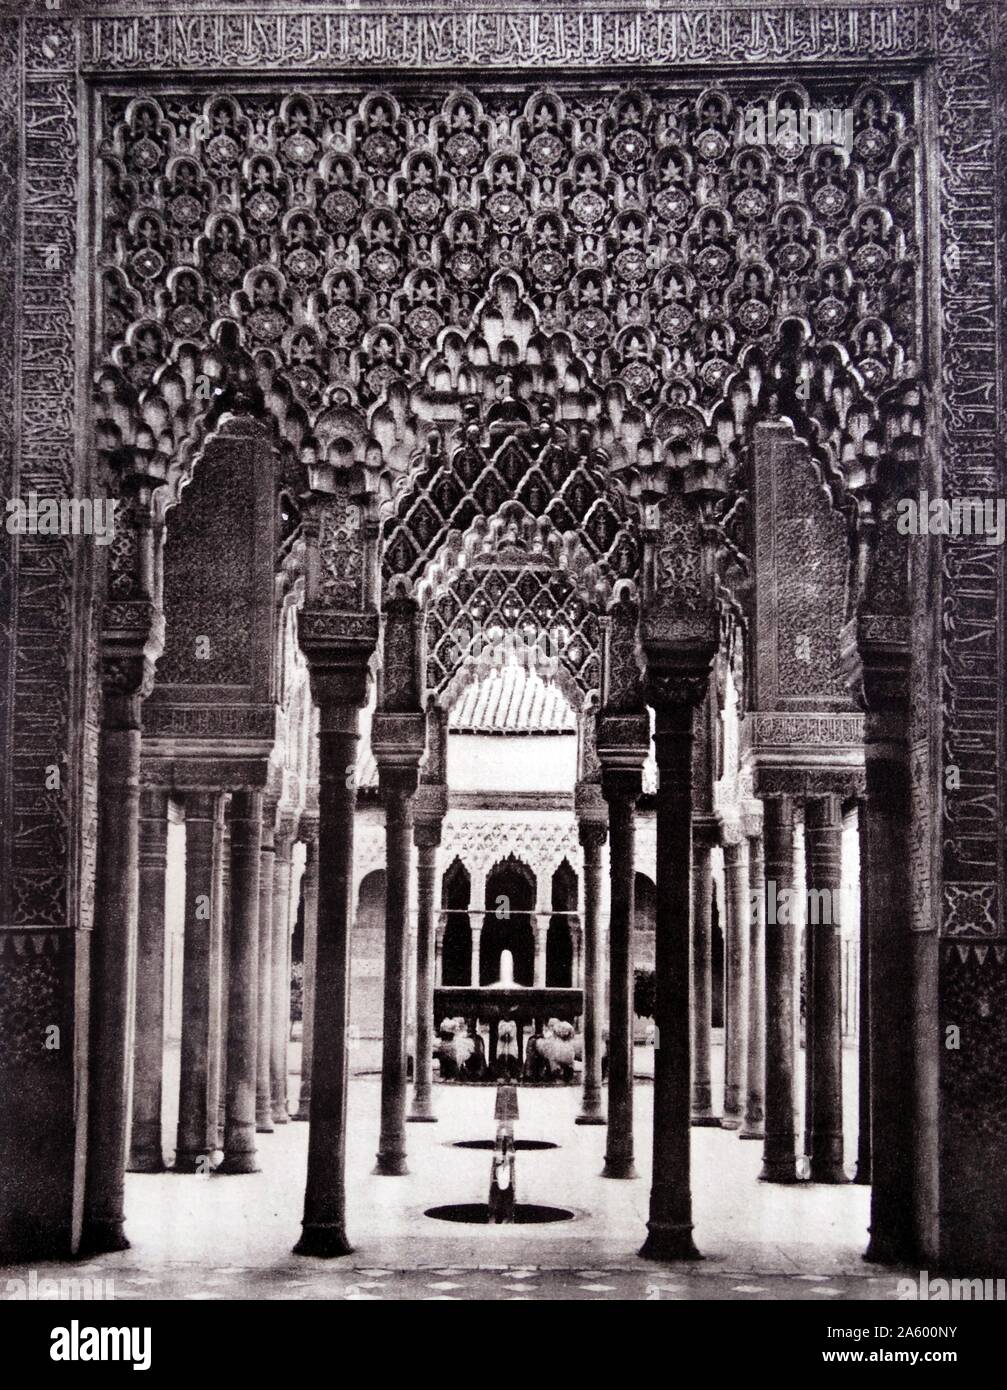 Alhambra palace and fortress complex located in Granada; Andalusia; Spain. renovated and rebuilt in the mid-13th century by the Moorish emir Mohammed ben Al-Ahmar of the Emirate of Granada Stock Photo